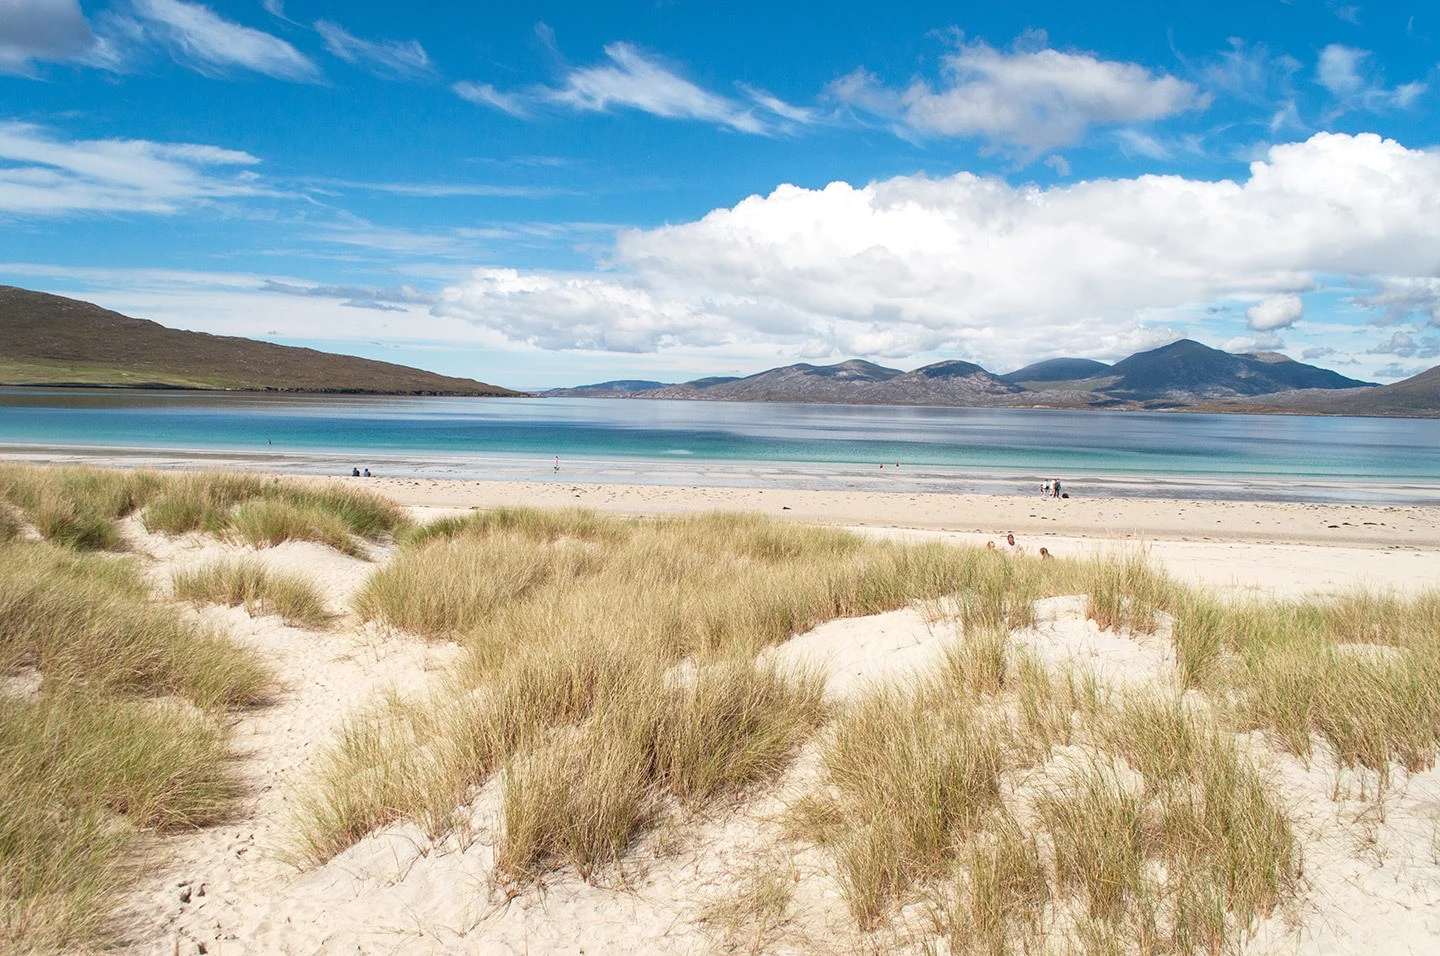 Deserted beaches in the Outer Hebrides, Scotland